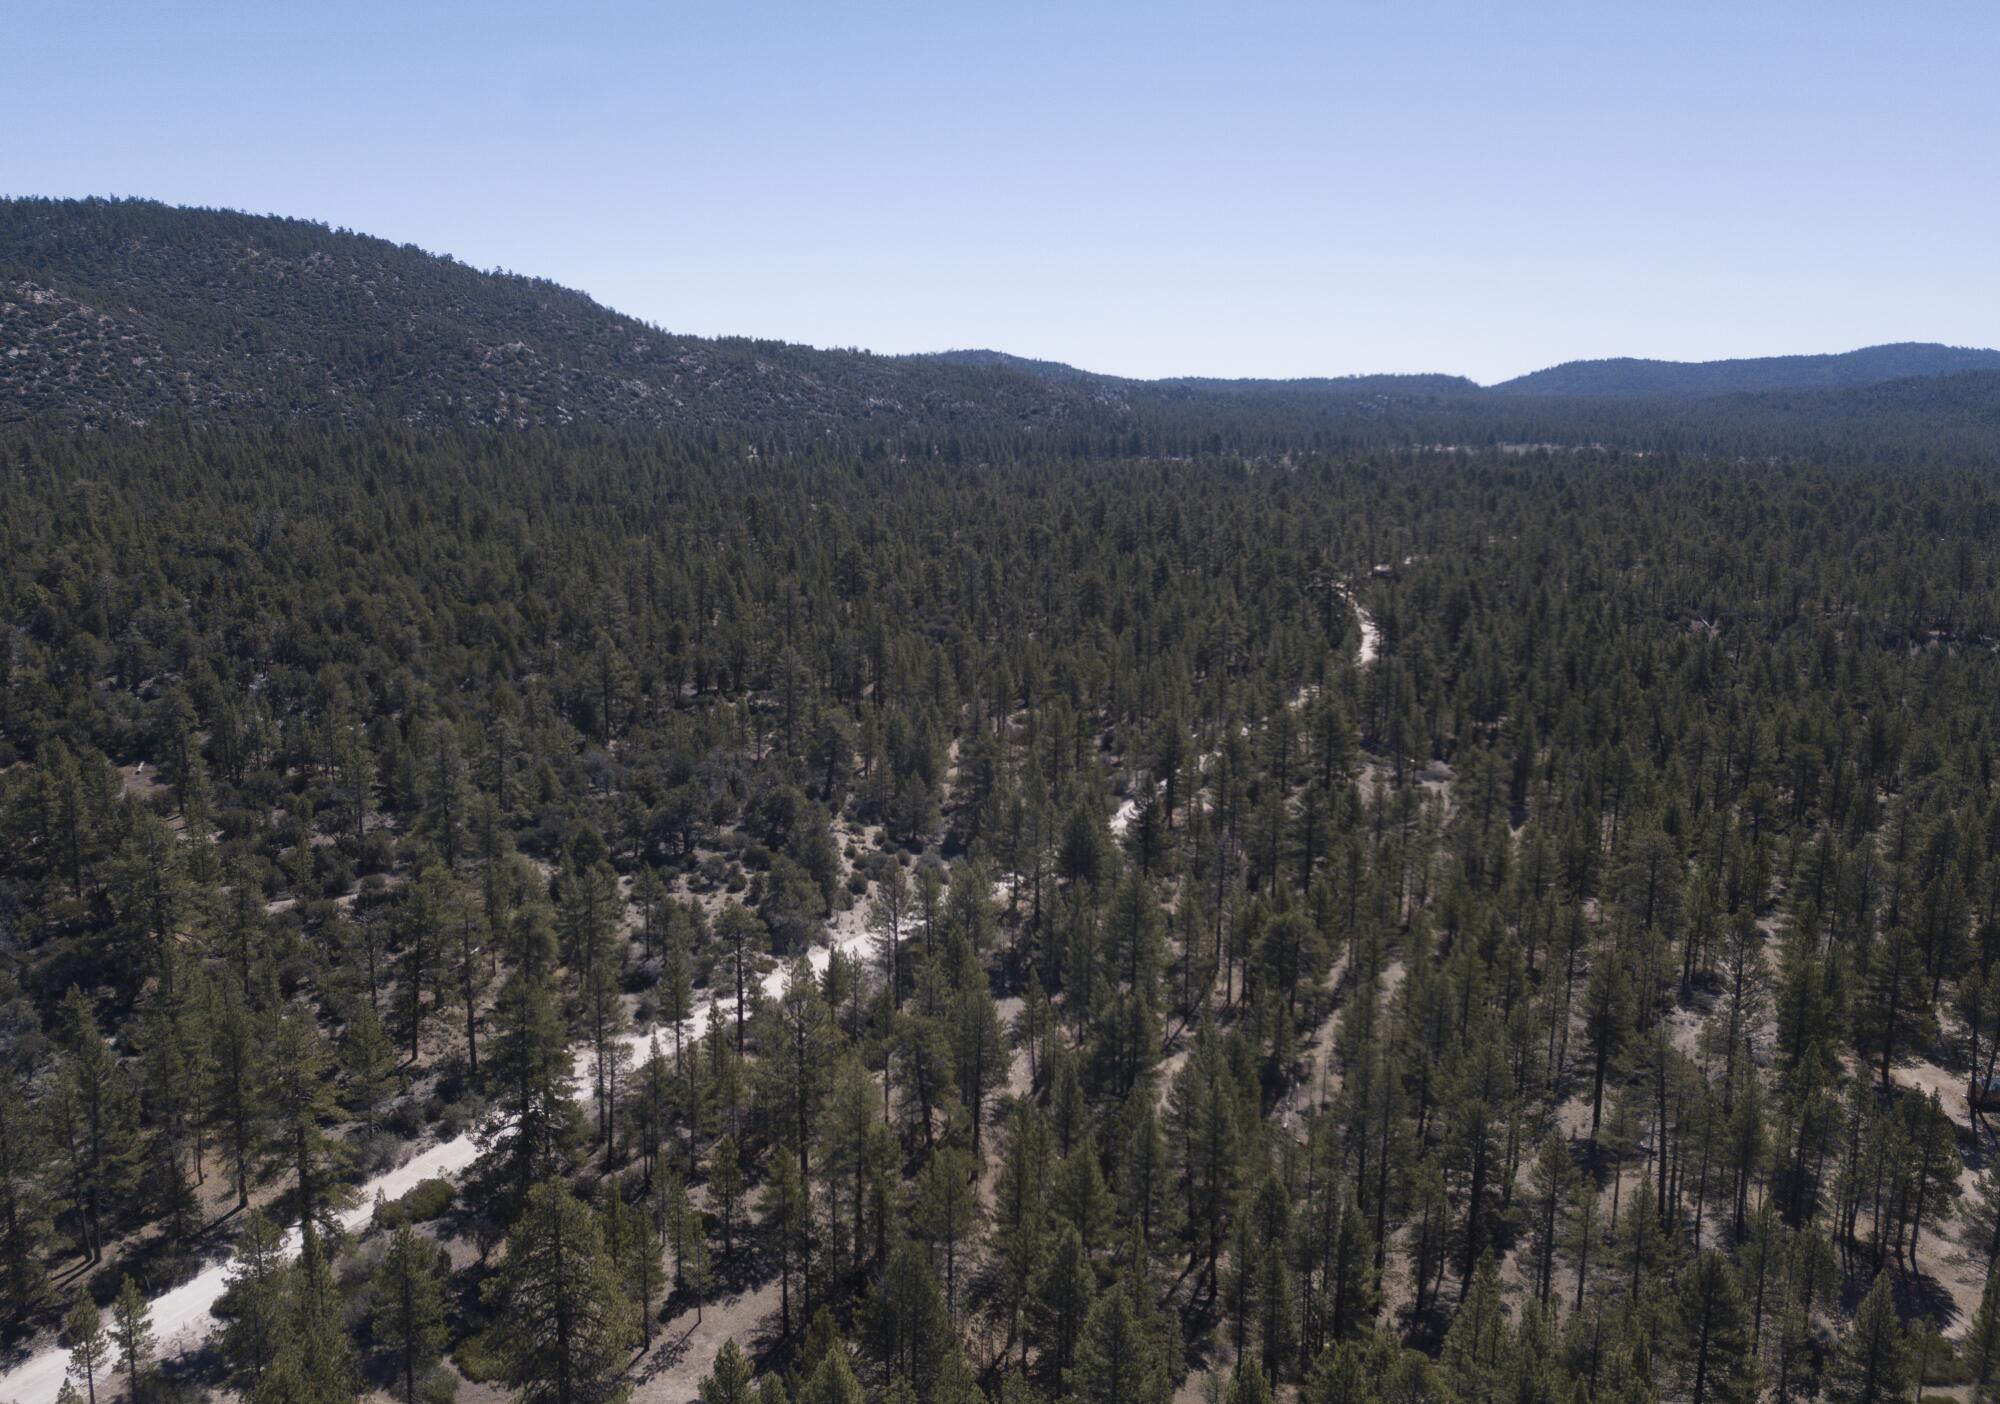 Holcomb Valley on the north side of Big Bear Lake